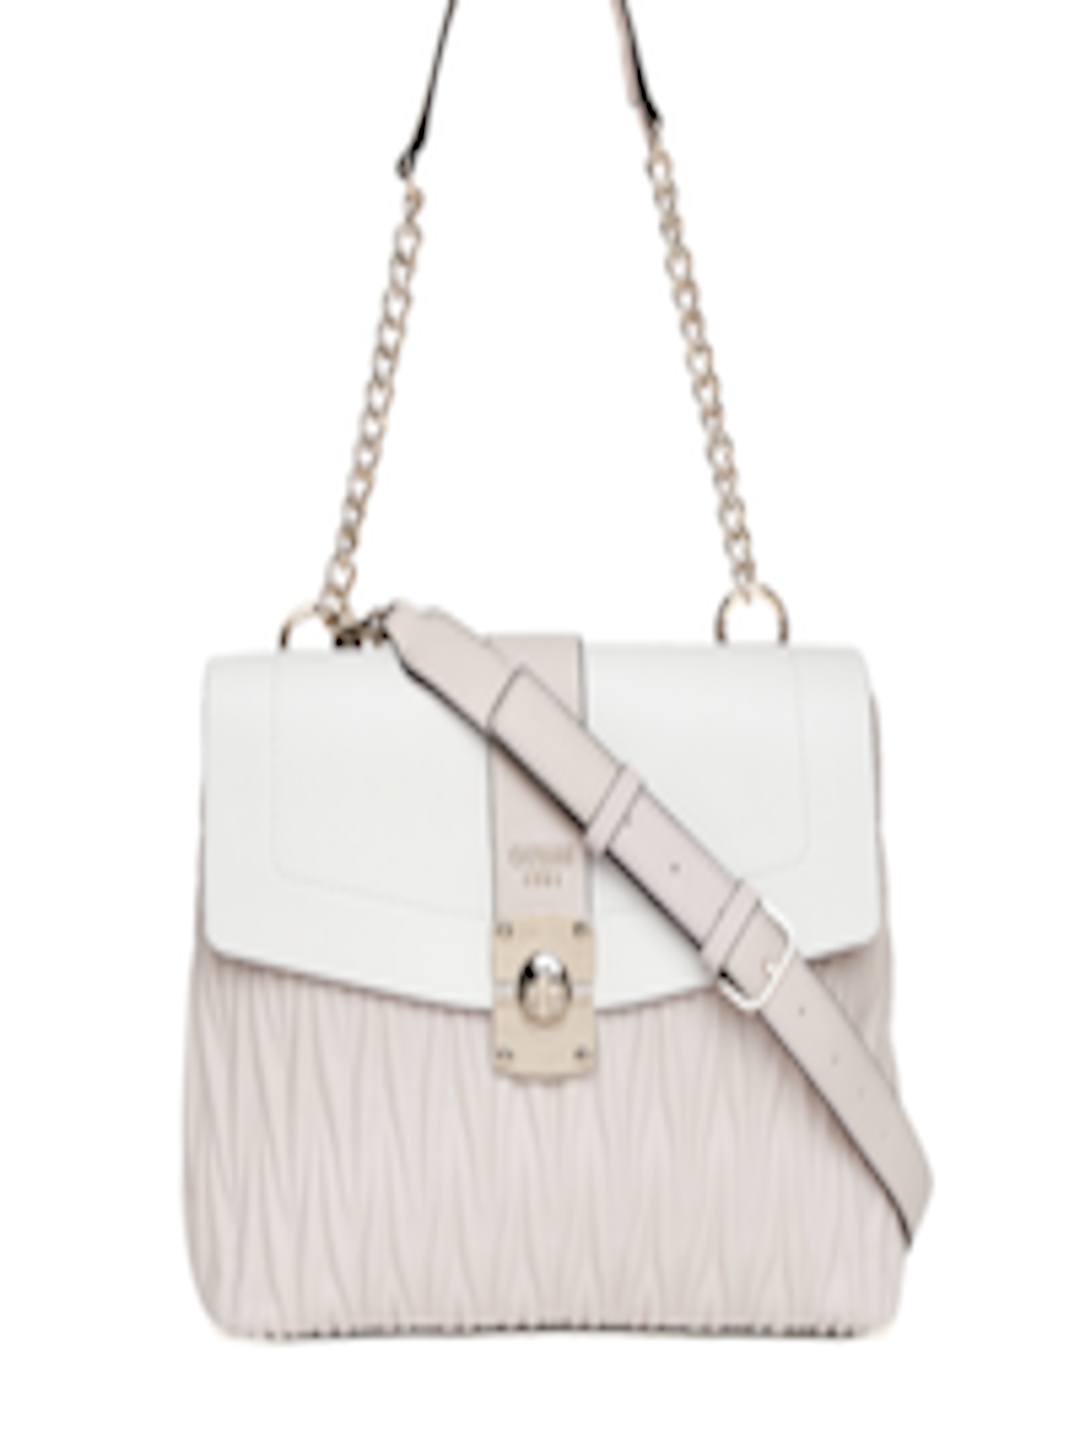 Buy GUESS Off White & Beige Textured Shoulder Bag With Sling Strap - Handbags for Women 1749469 ...